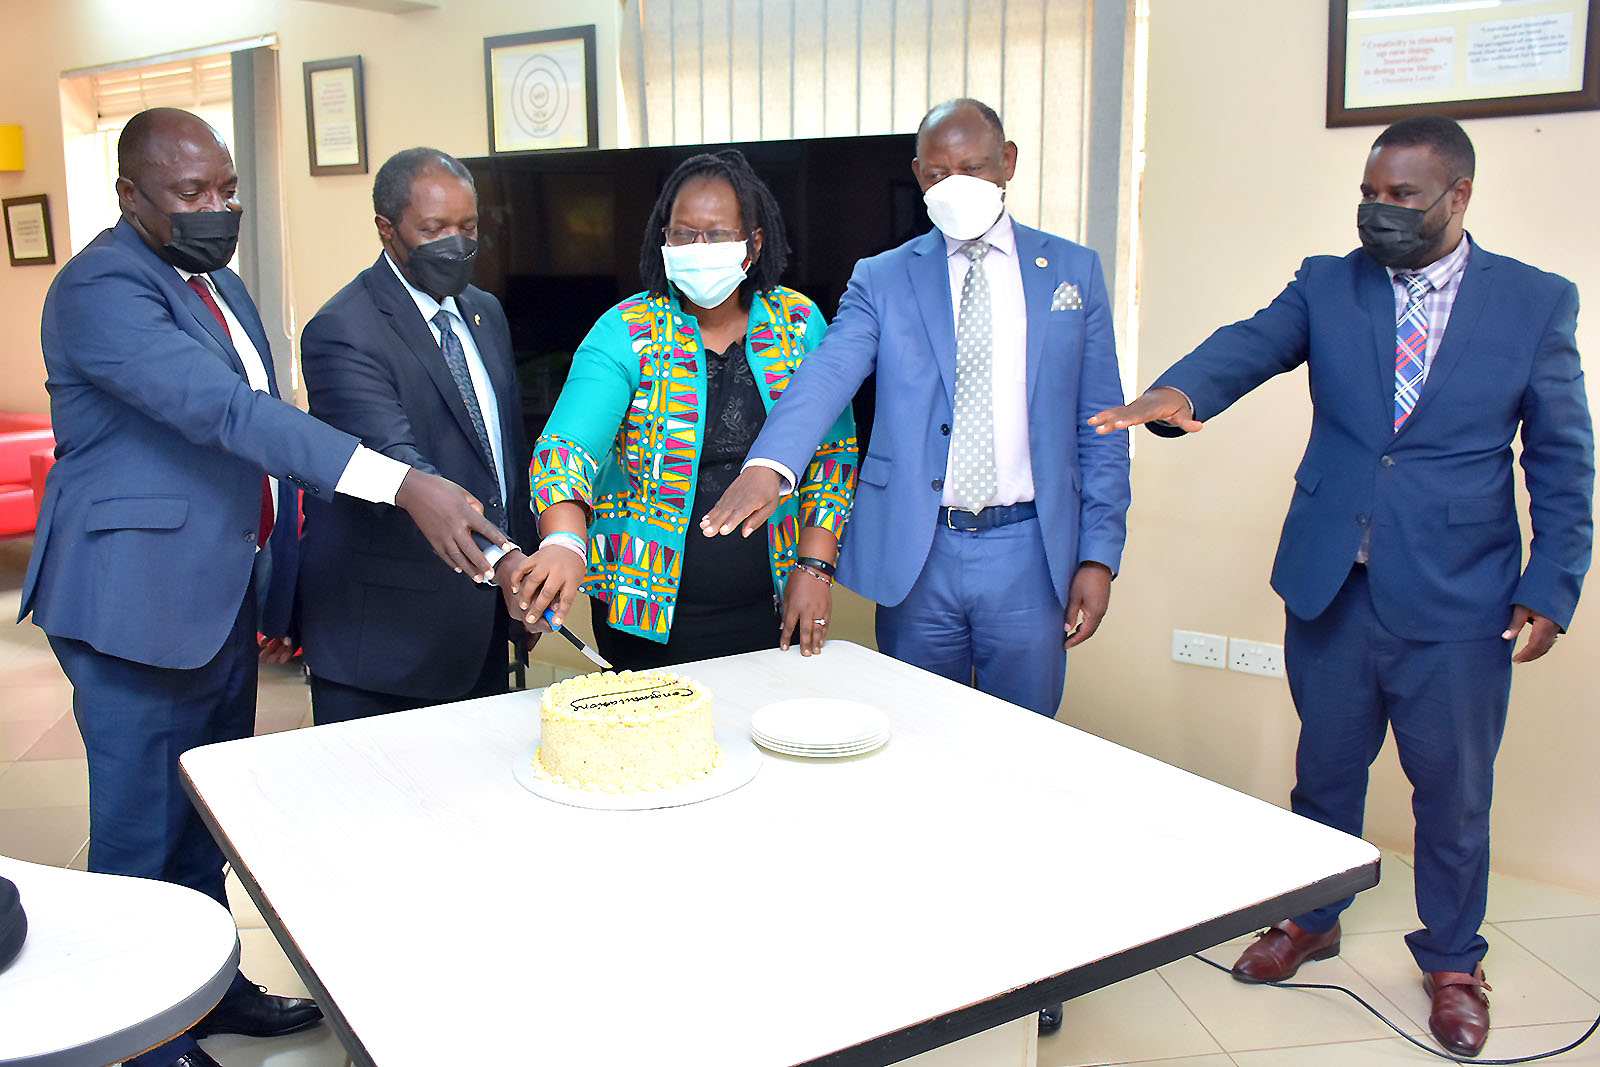 The Vice Chancellor, Prof. Barnabas Nawangwe (2nd R) joins Head GAMSU-Prof. Grace Bantebya (C), Head Mak-RIF-Prof. Fred Masagazi Masaazi (L), Outgoing Head GAMSU & Mak-RIF-Prof. William Bazeyo (2nd L) and Dr. Robert Wamala-DRGT (R) to cut cake at the Induction Ceremony on 8th February 2022 at the RAN Offices in Kololo.